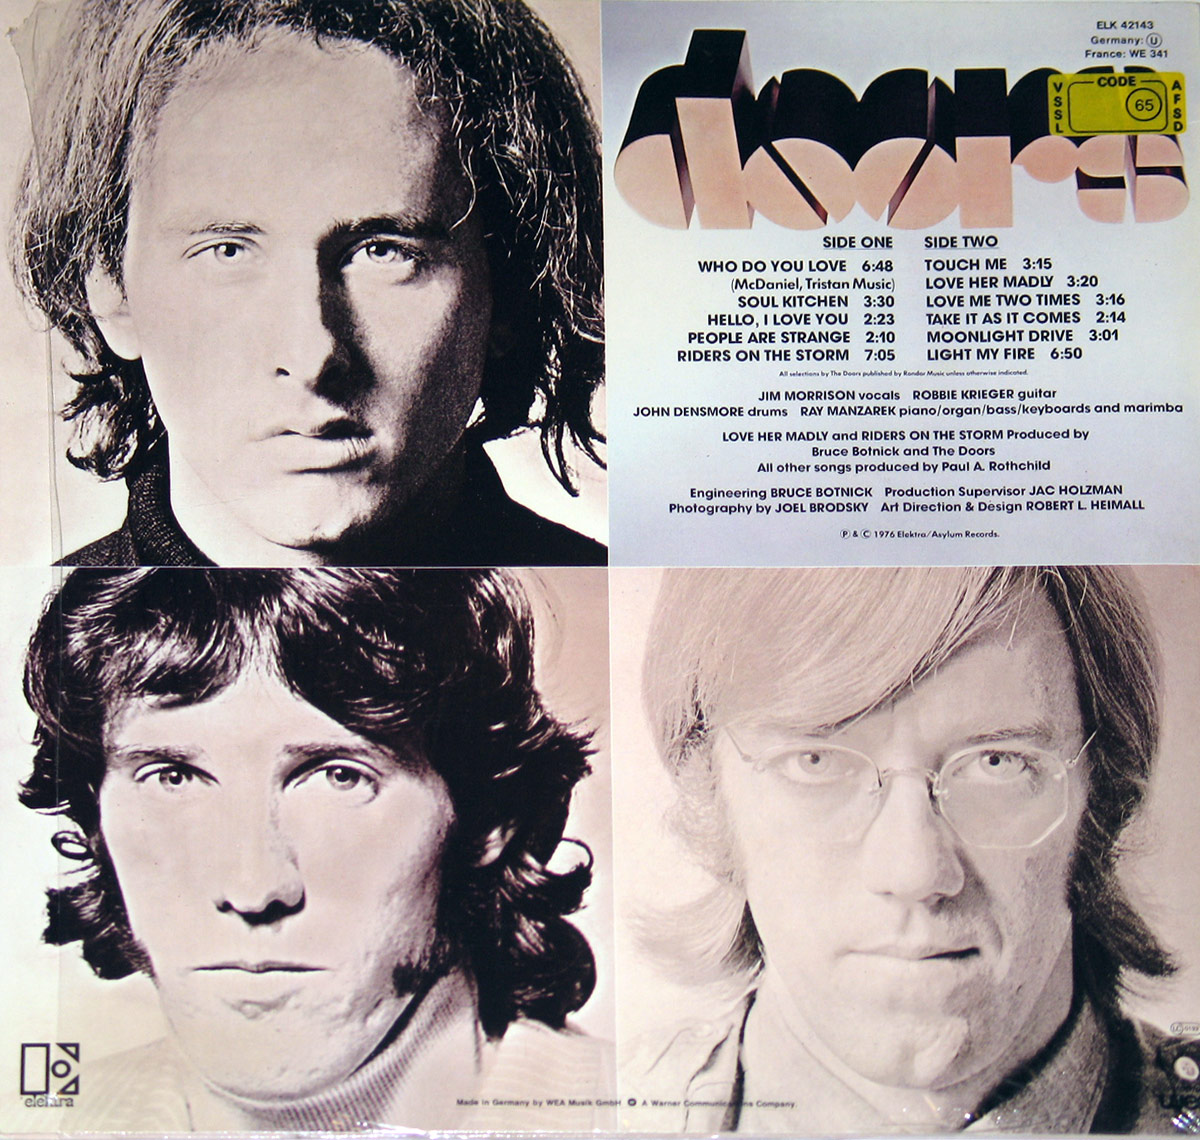 THE DOORS -  The Best Of The Doors 197 back cover